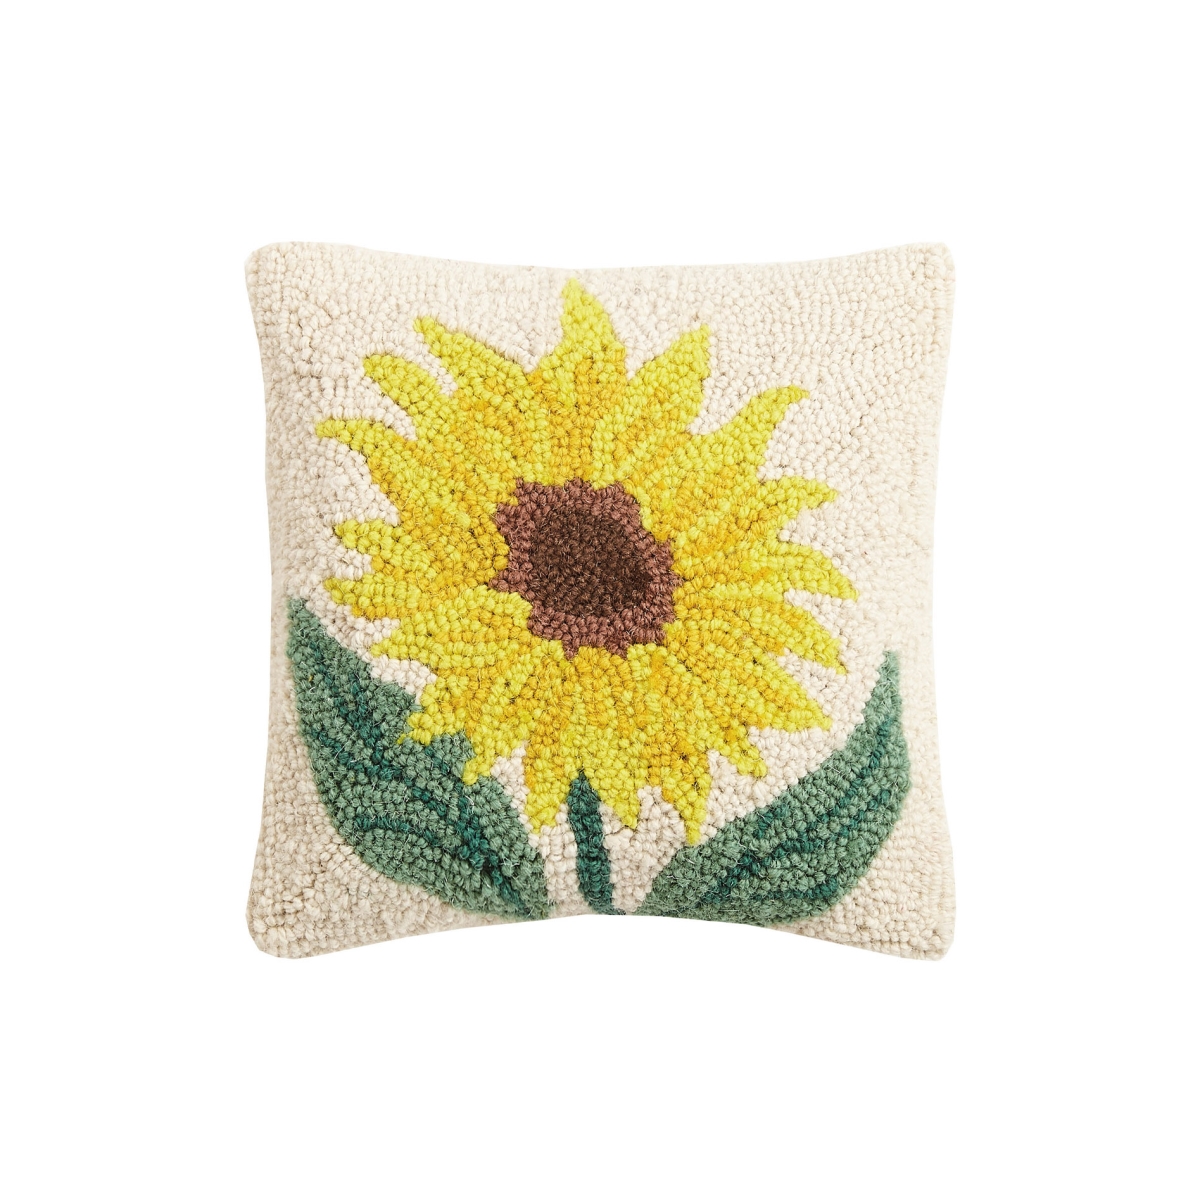 Picture of Peking Handicraft 30JES1577C10SQ 10 x 10 in. Sunflower Poly Filled Hook Pillow - Pack of 2